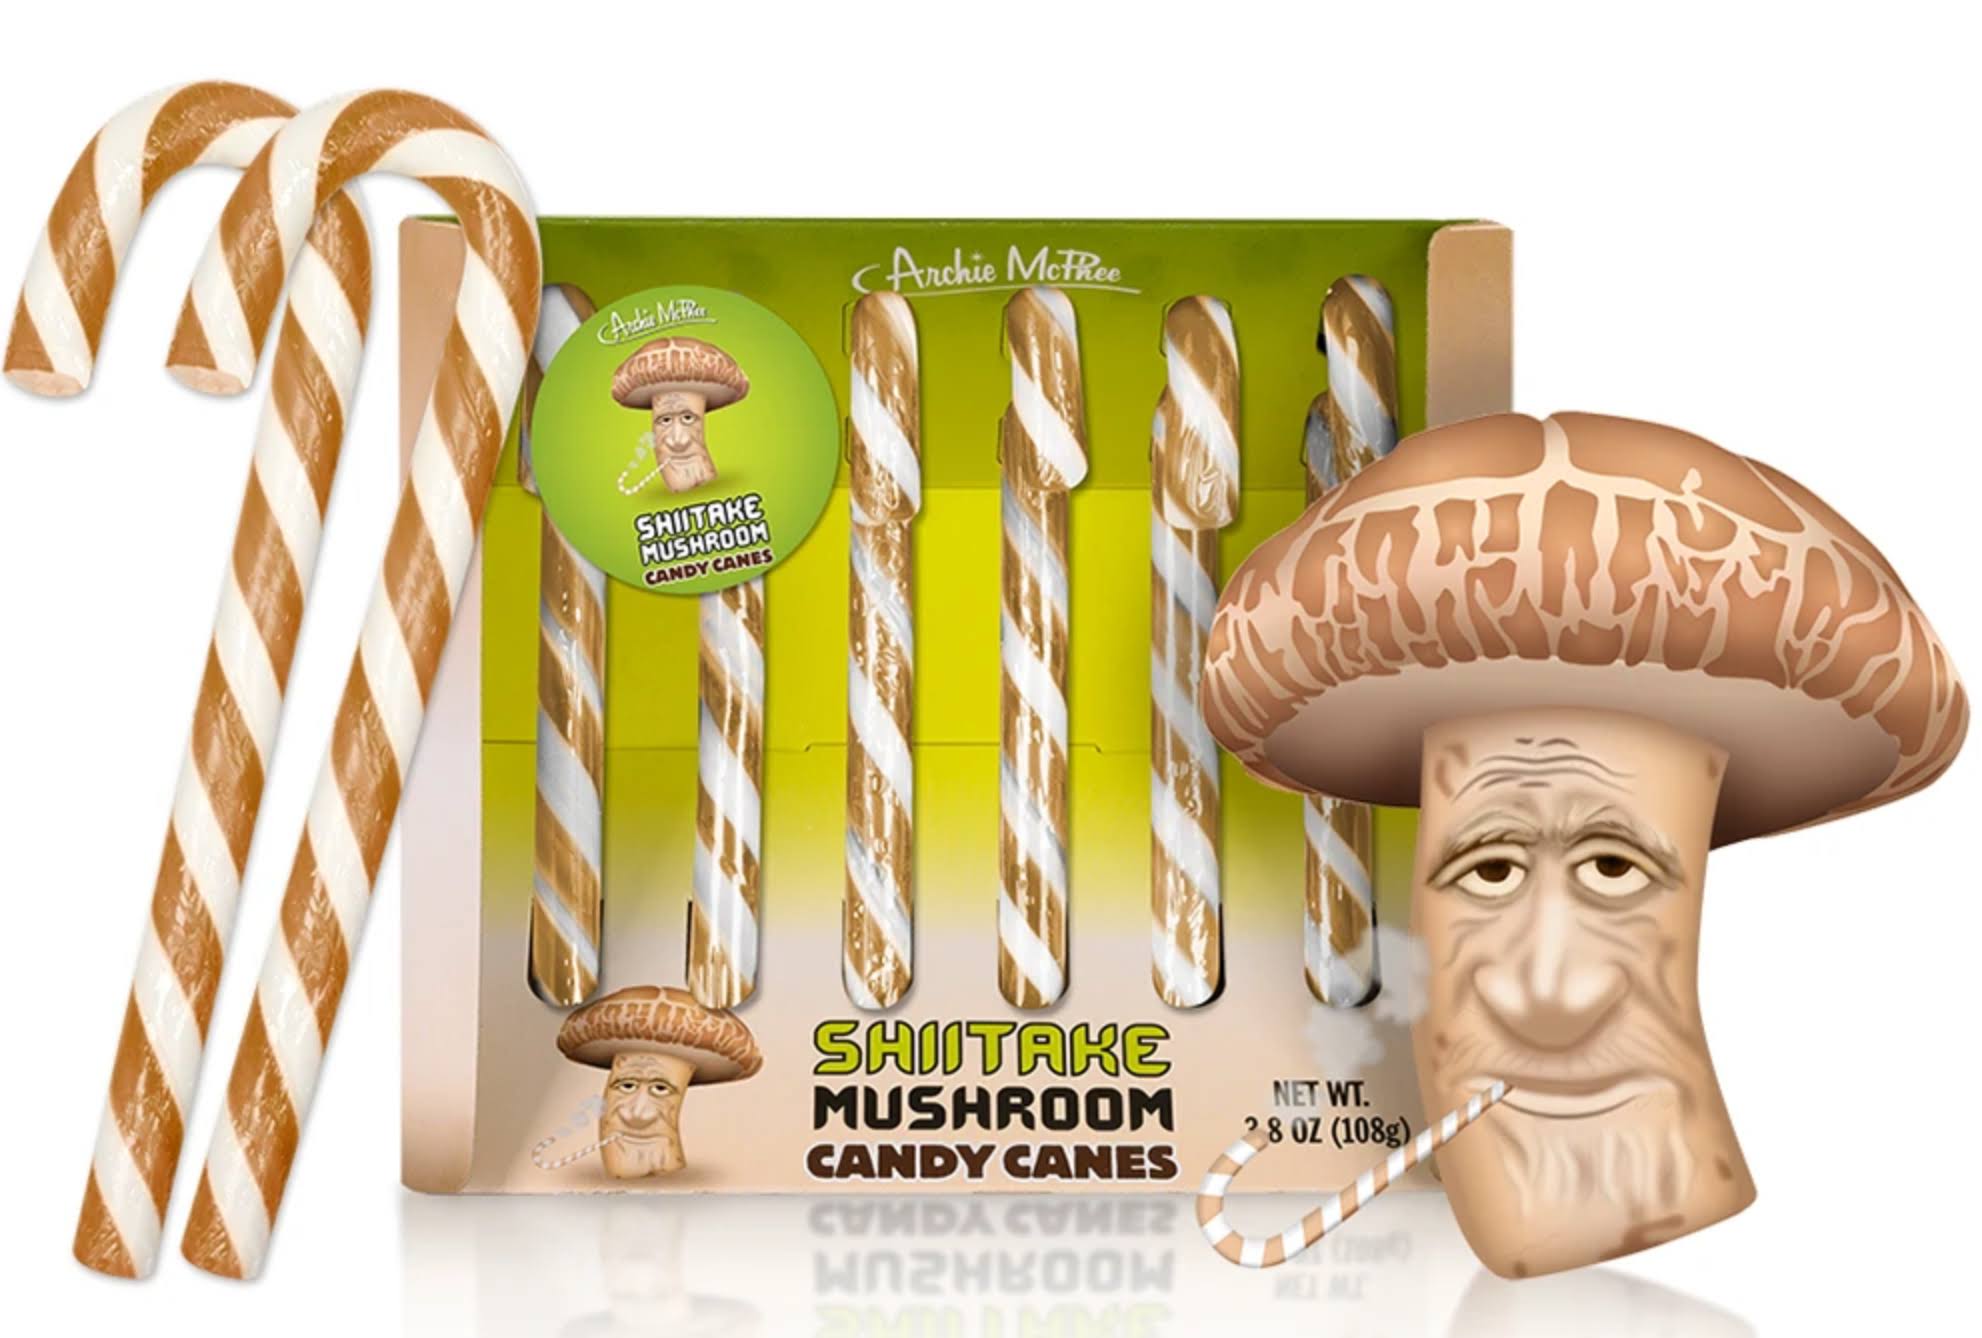 Accoutrements Shitake mushroom candy canes § 6 piece gift set